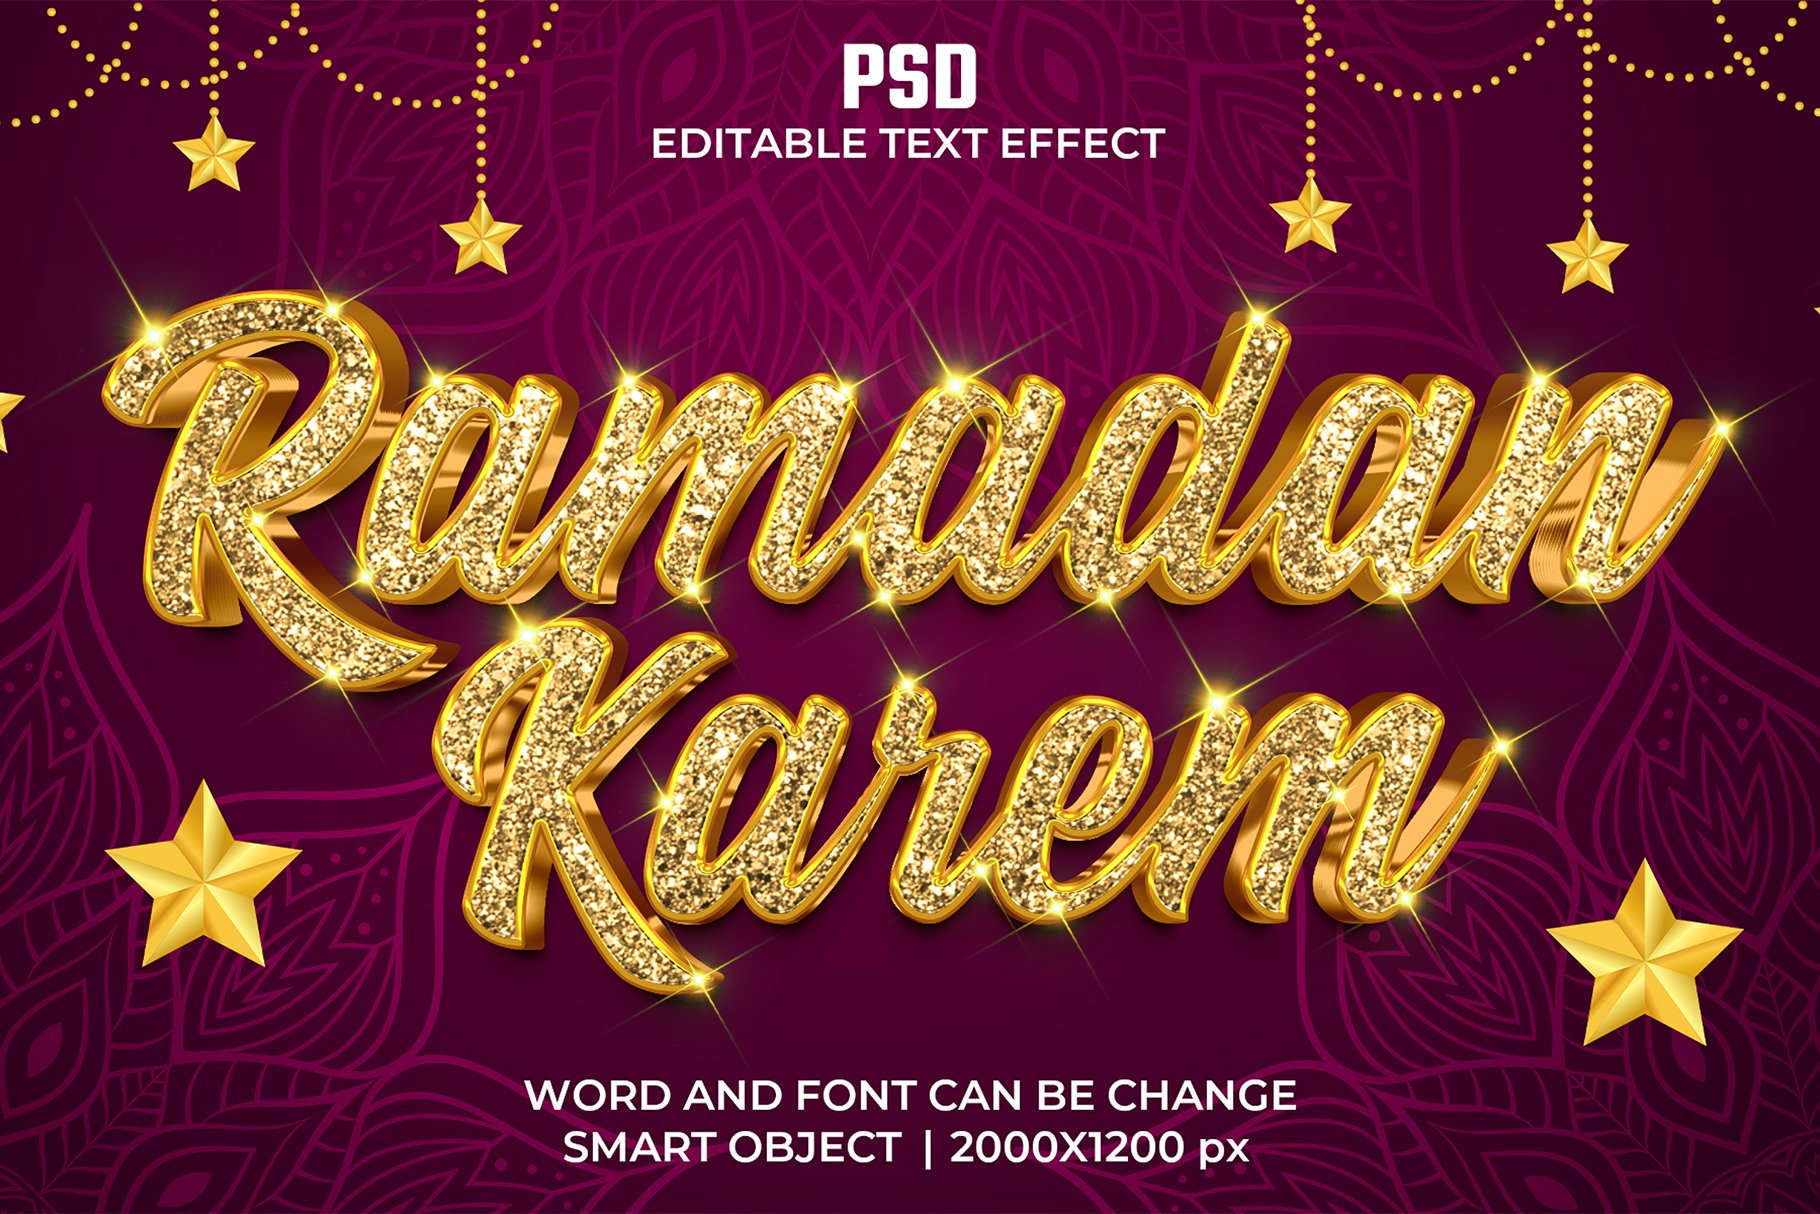 Luxury islamic 3d Psd Text Effectcover image.